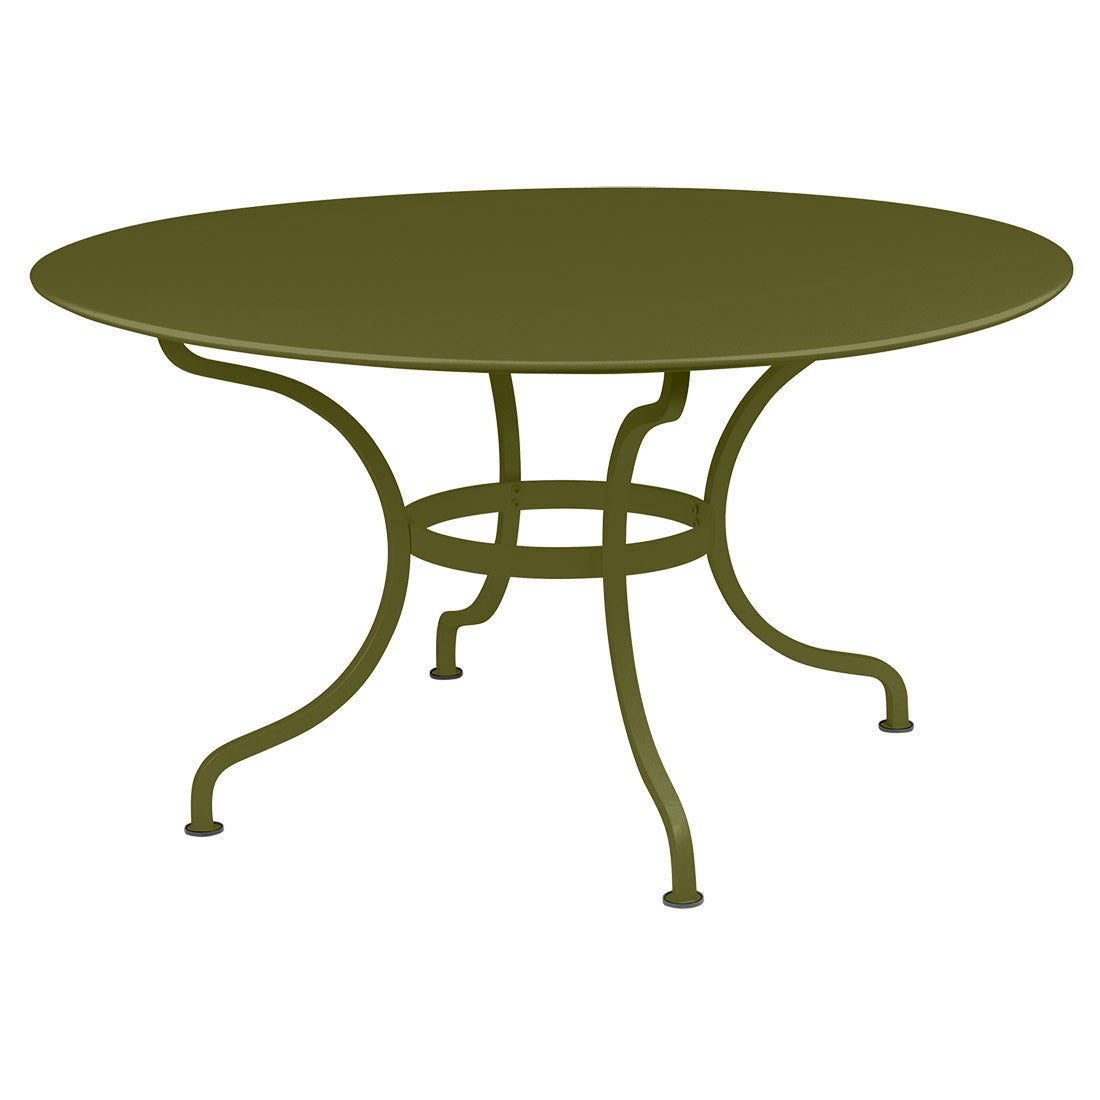 Fermob Romane Table 54 Inch Round Dining Table